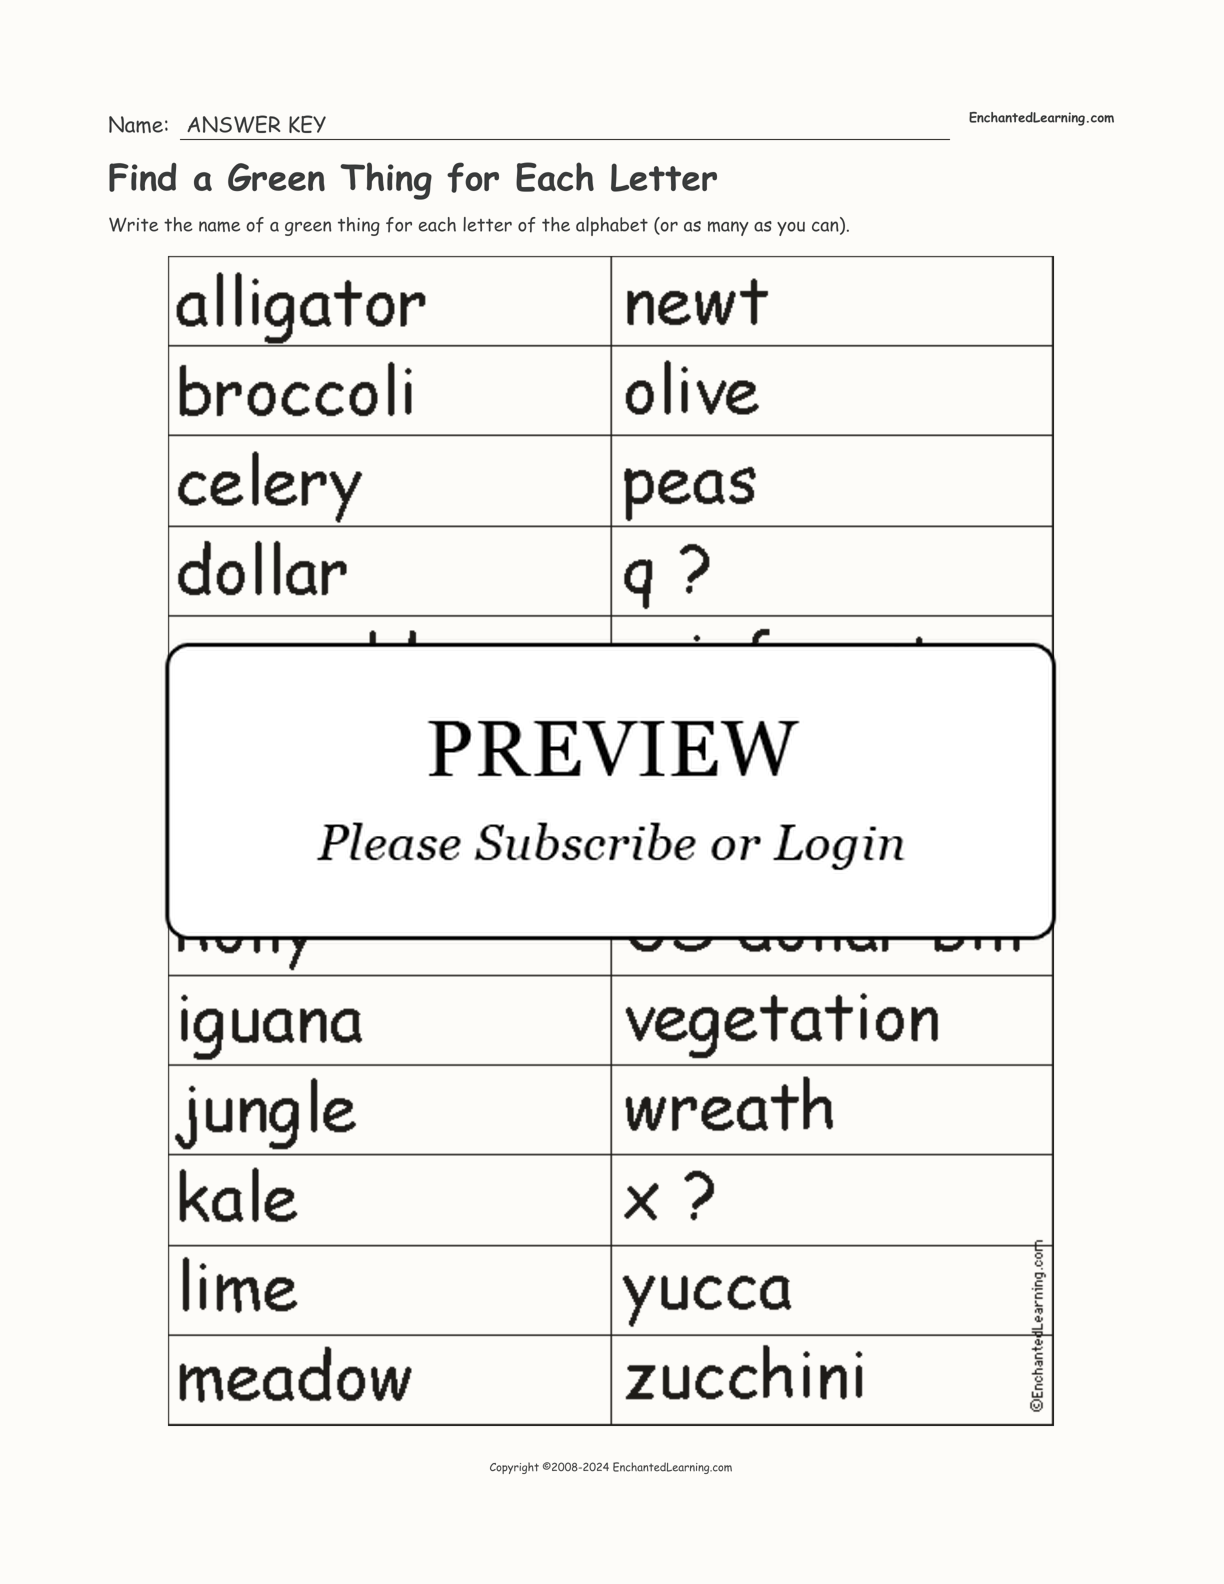 Find a Green Thing for Each Letter interactive worksheet page 2